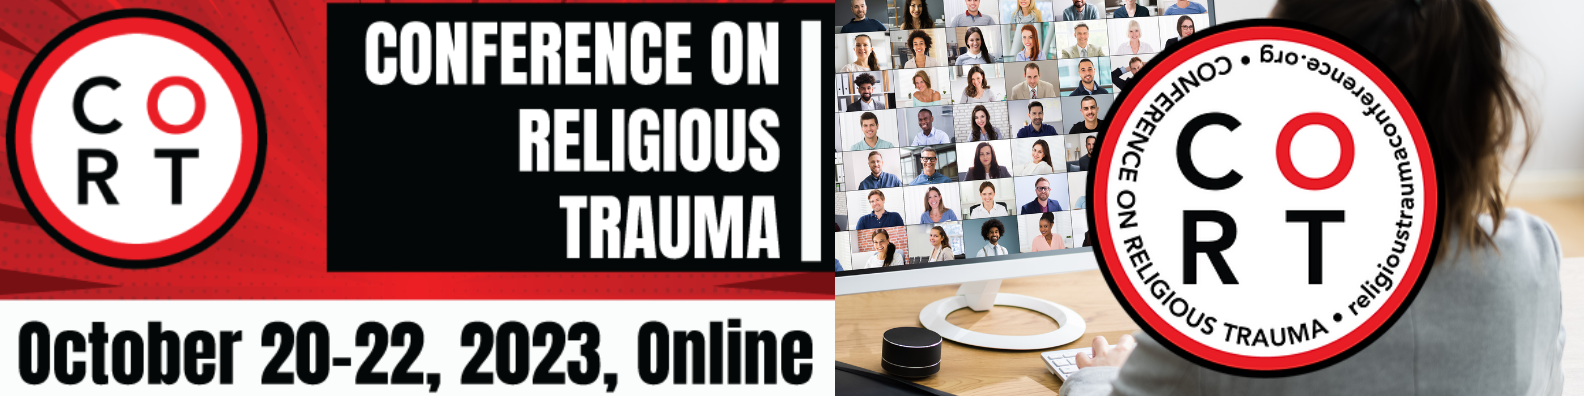 Conference on Religious Trauma (Online)